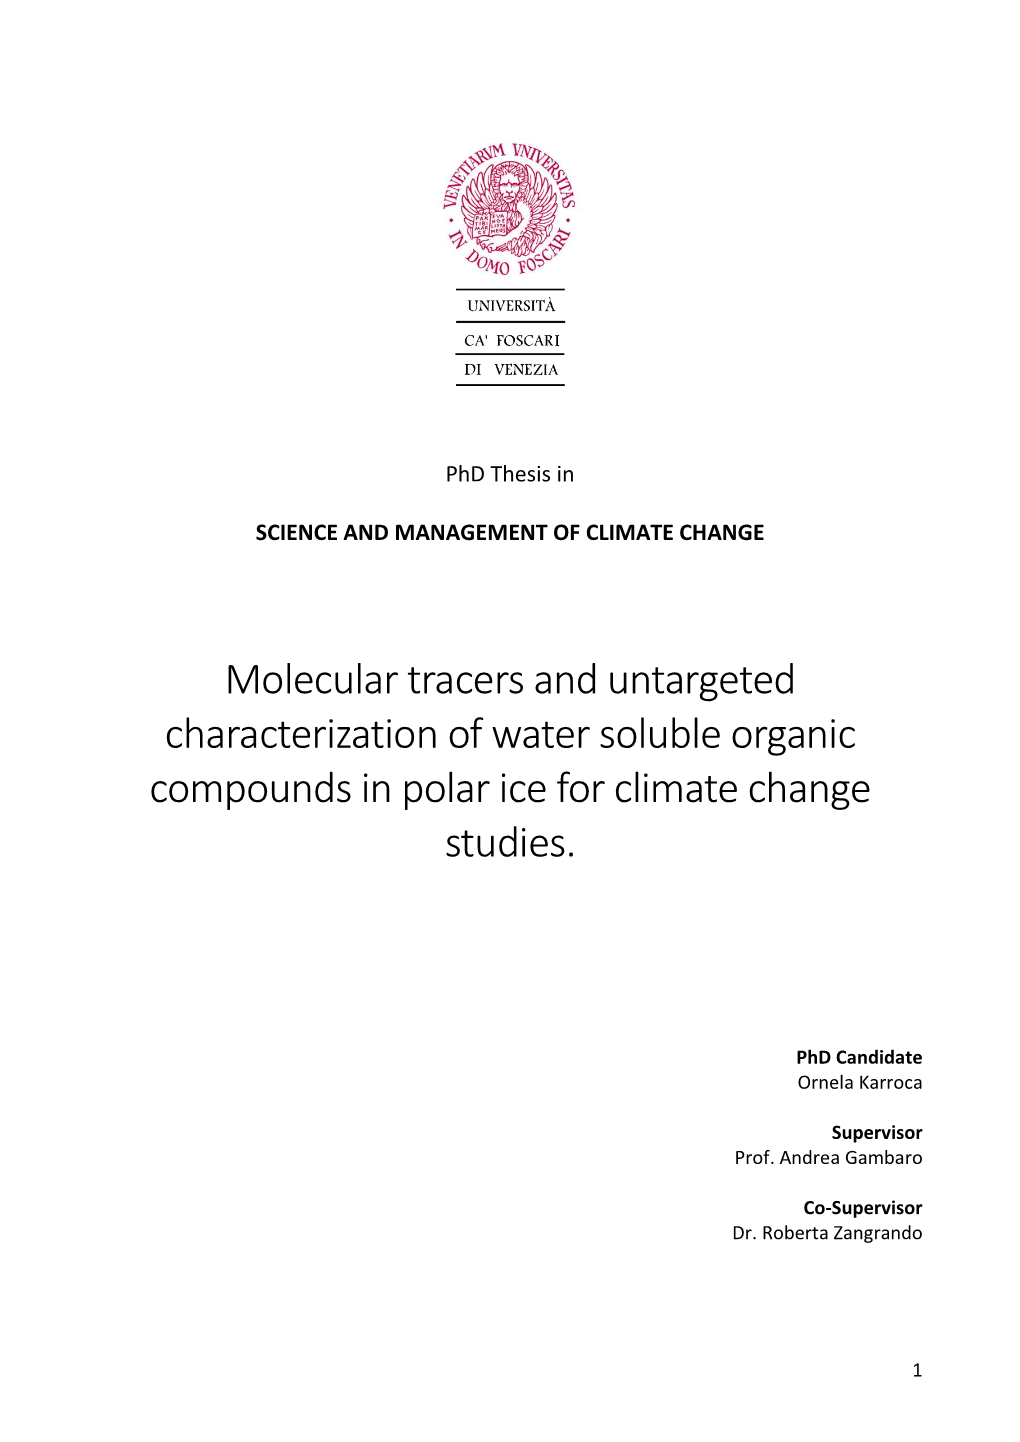 Molecular Tracers and Untargeted Characterization of Water Soluble Organic Compounds in Polar Ice for Climate Change Studies